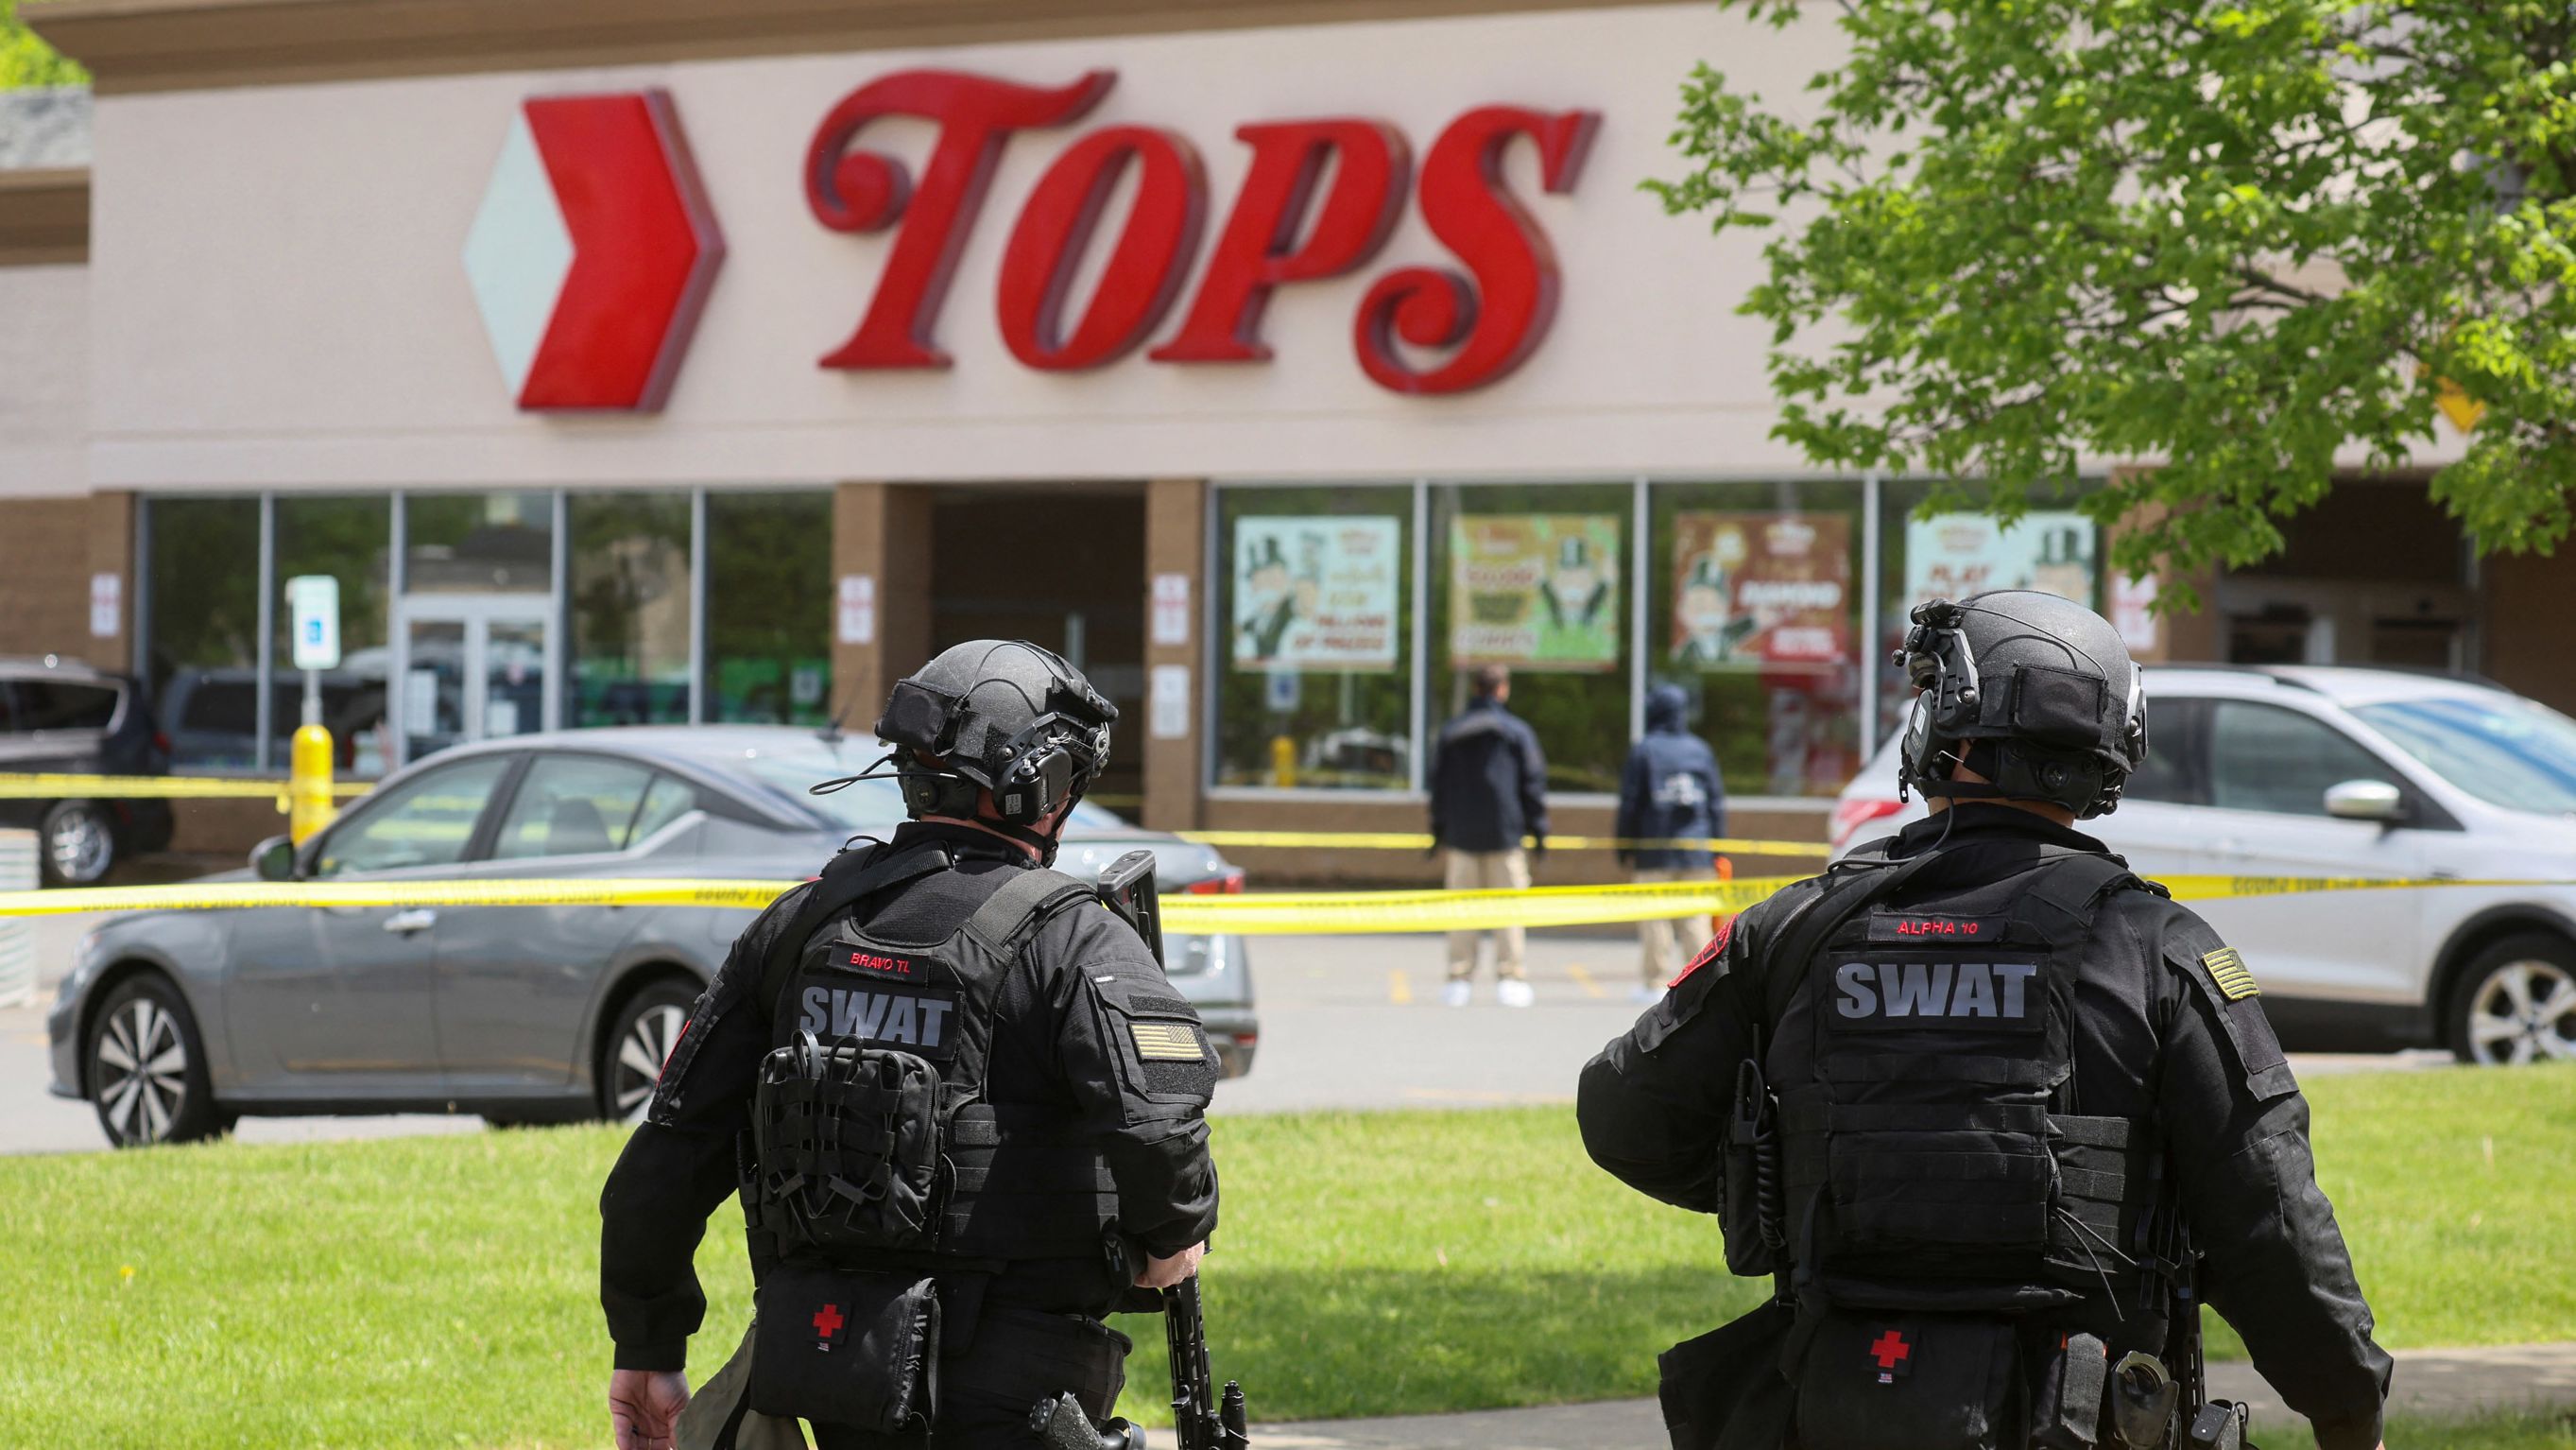 Police work Saturday at the Tops supermarket in Buffalo, New York.